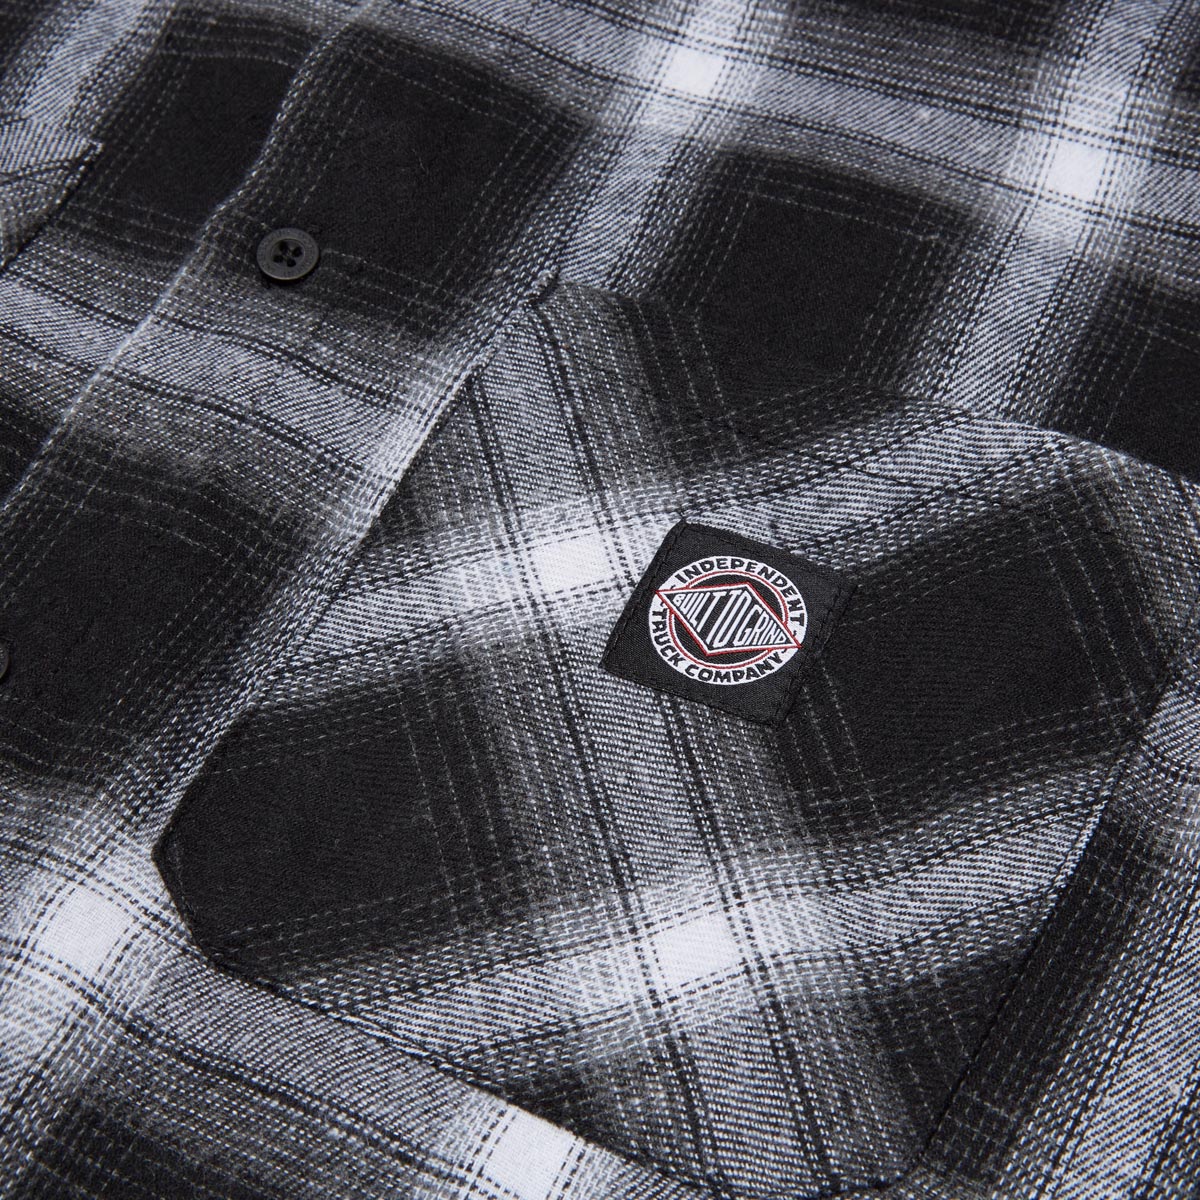 Independent Uncle Charlie Flannel Shirt - Black/White image 3